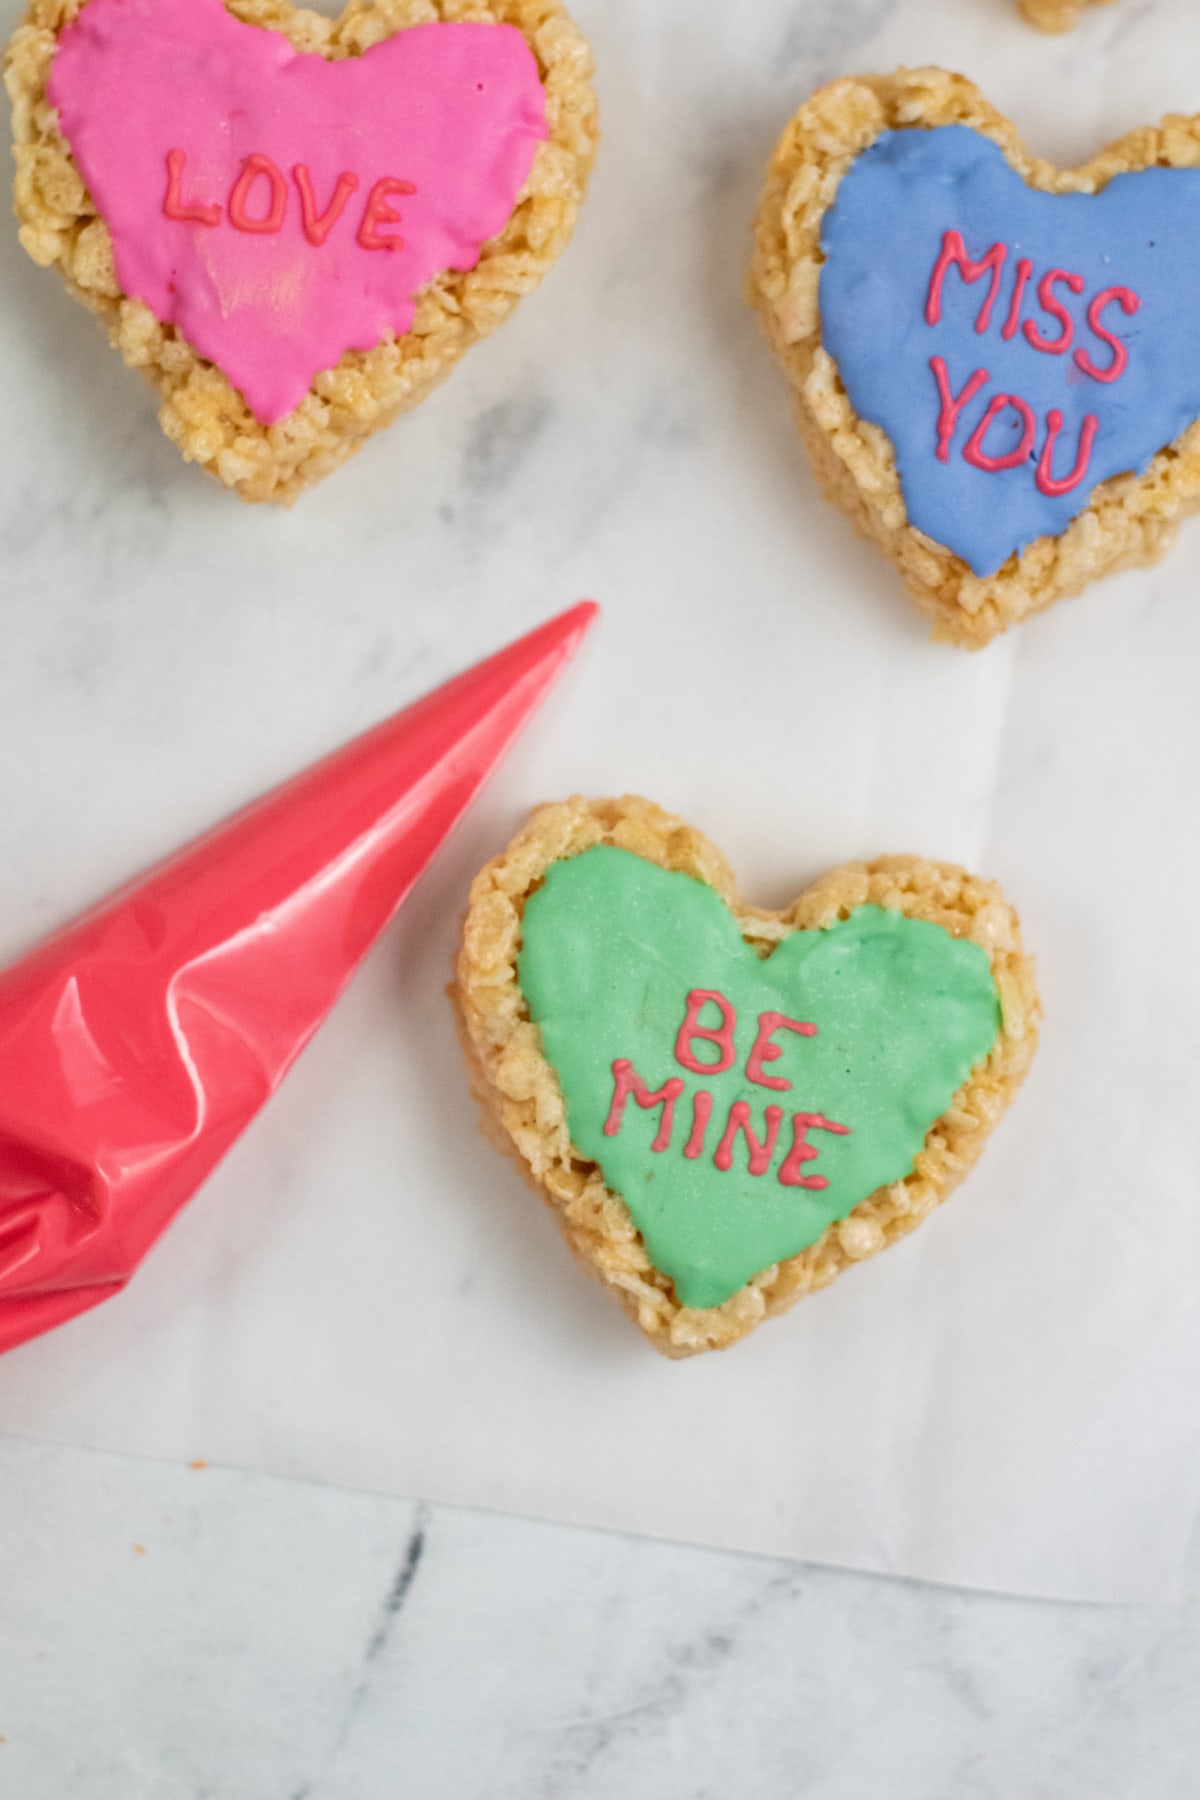 Heart shaped rice krispie treats with text